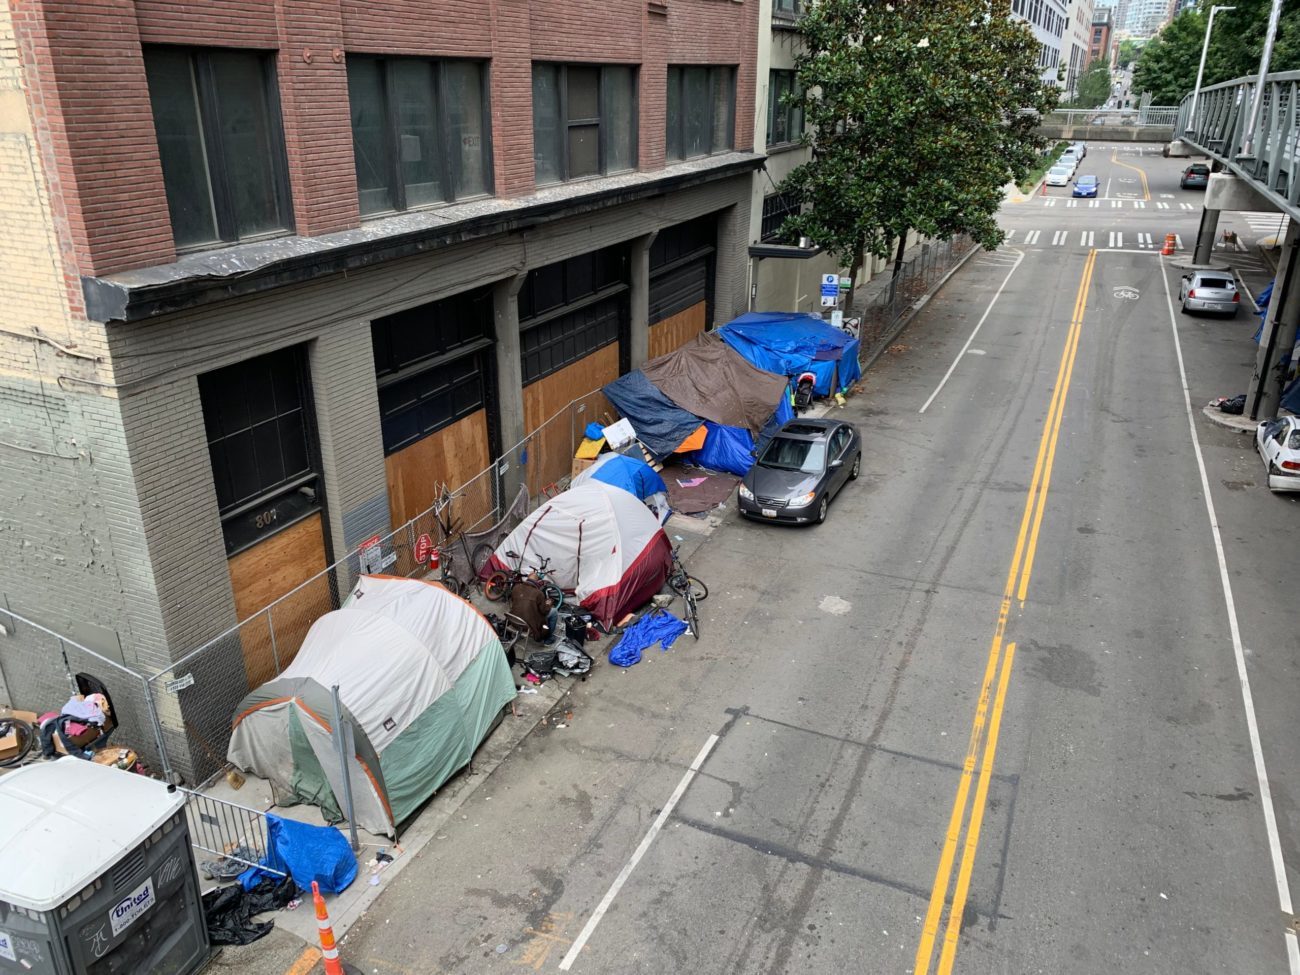 Do the Homeless Really Need More Housing?